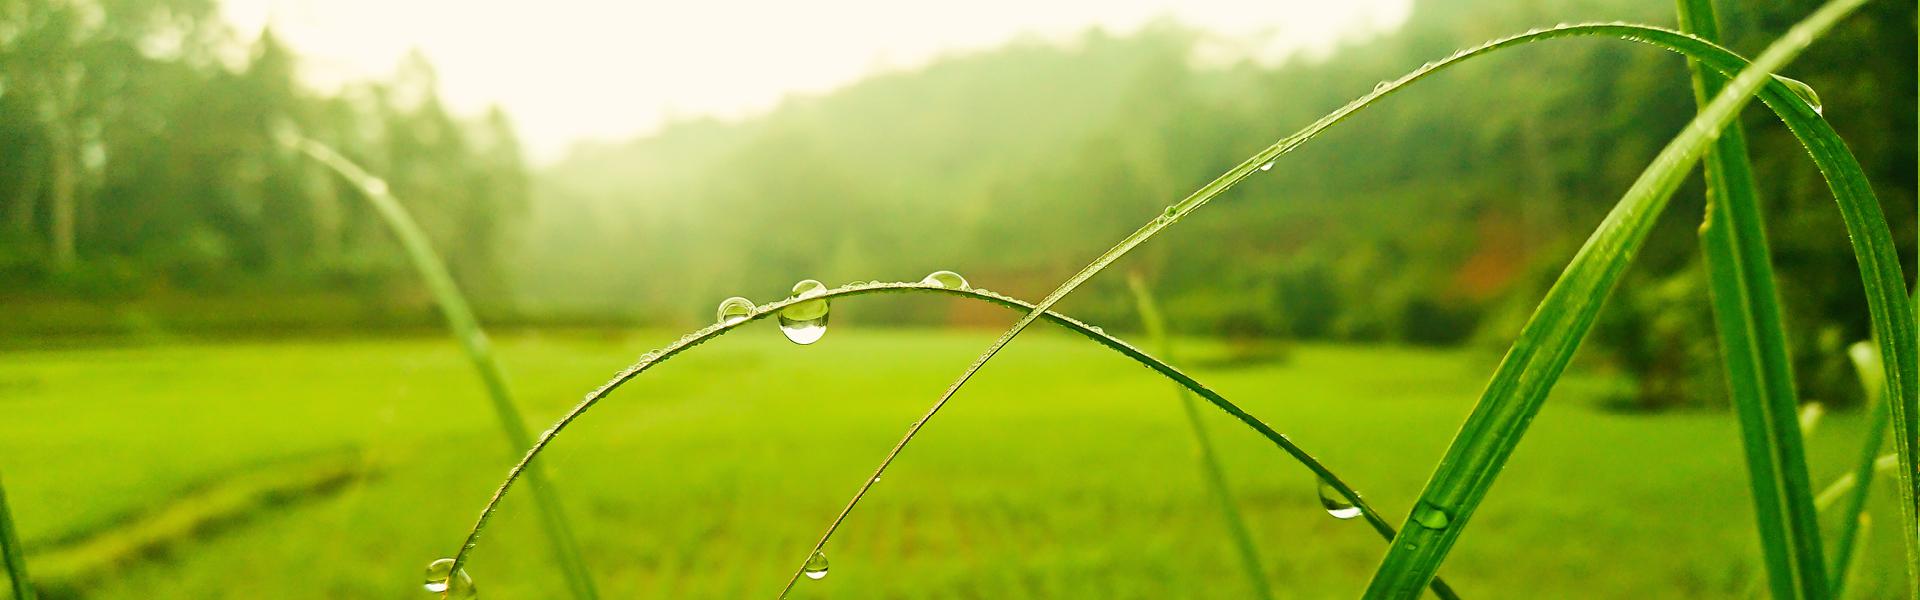 Image of Grass and Water drops